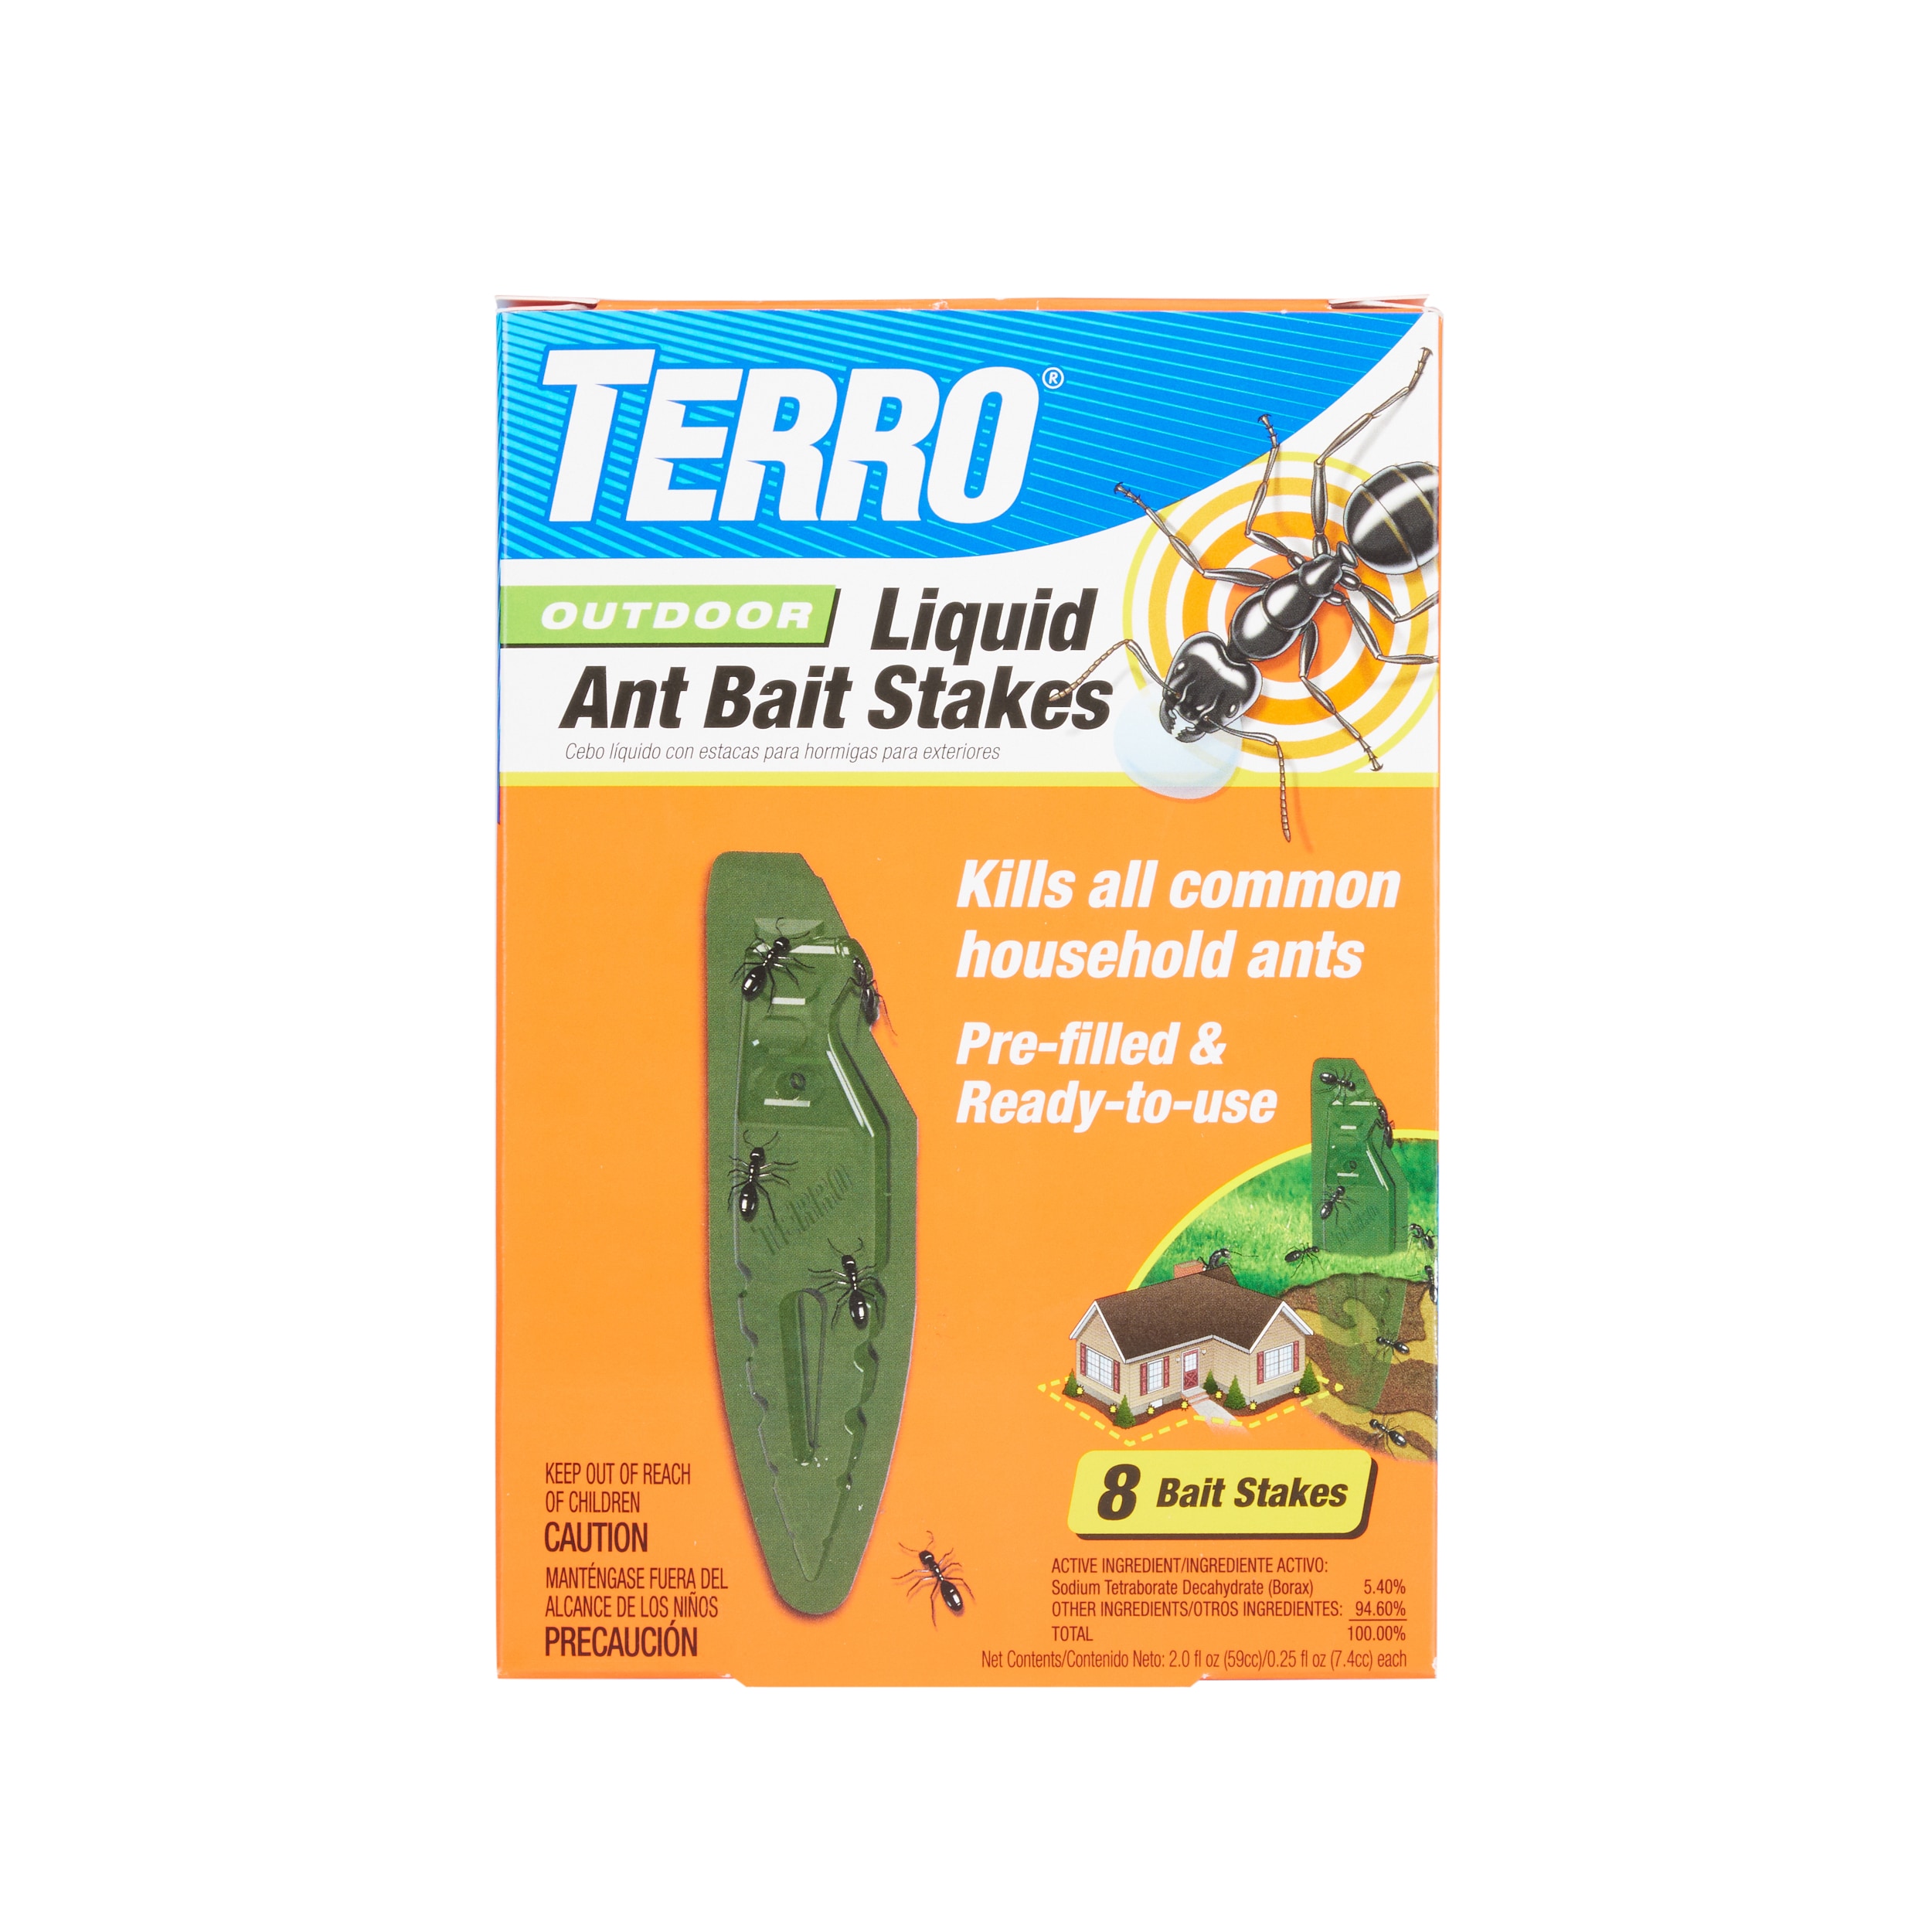 Liquid Ant Baits for Indoors and Outdoors